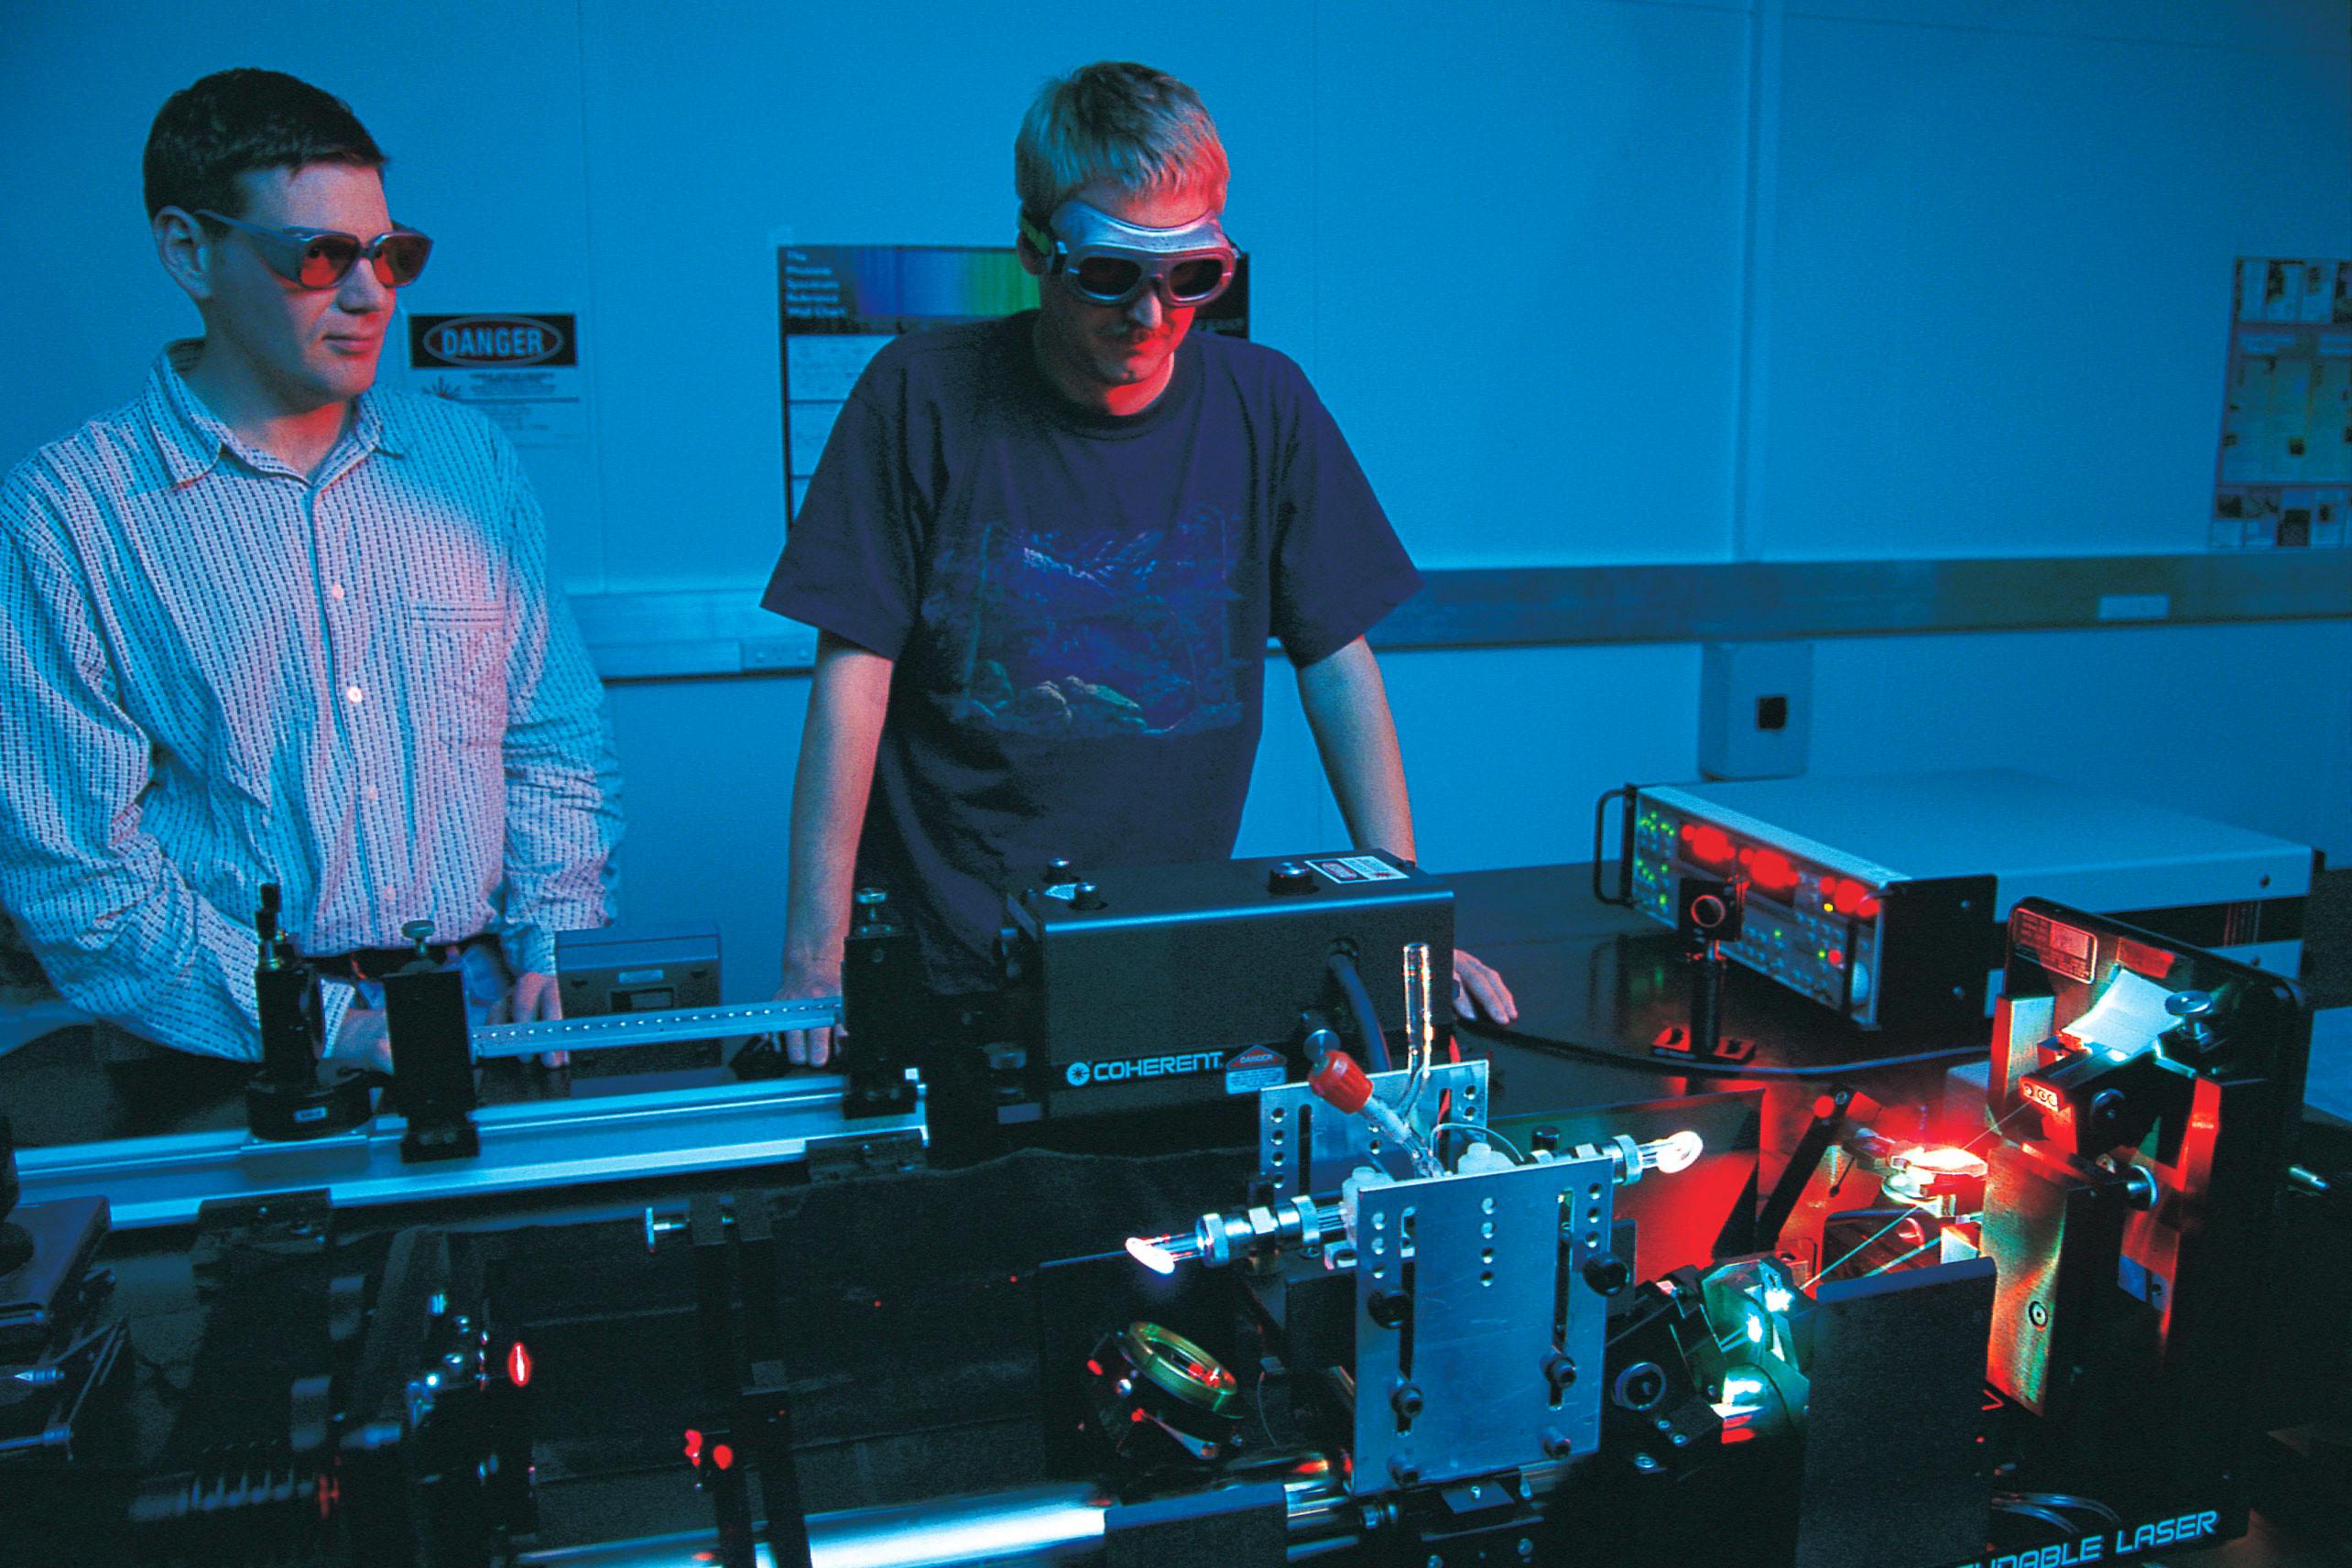 Henrik and Daryl in the laser lab, 2003.